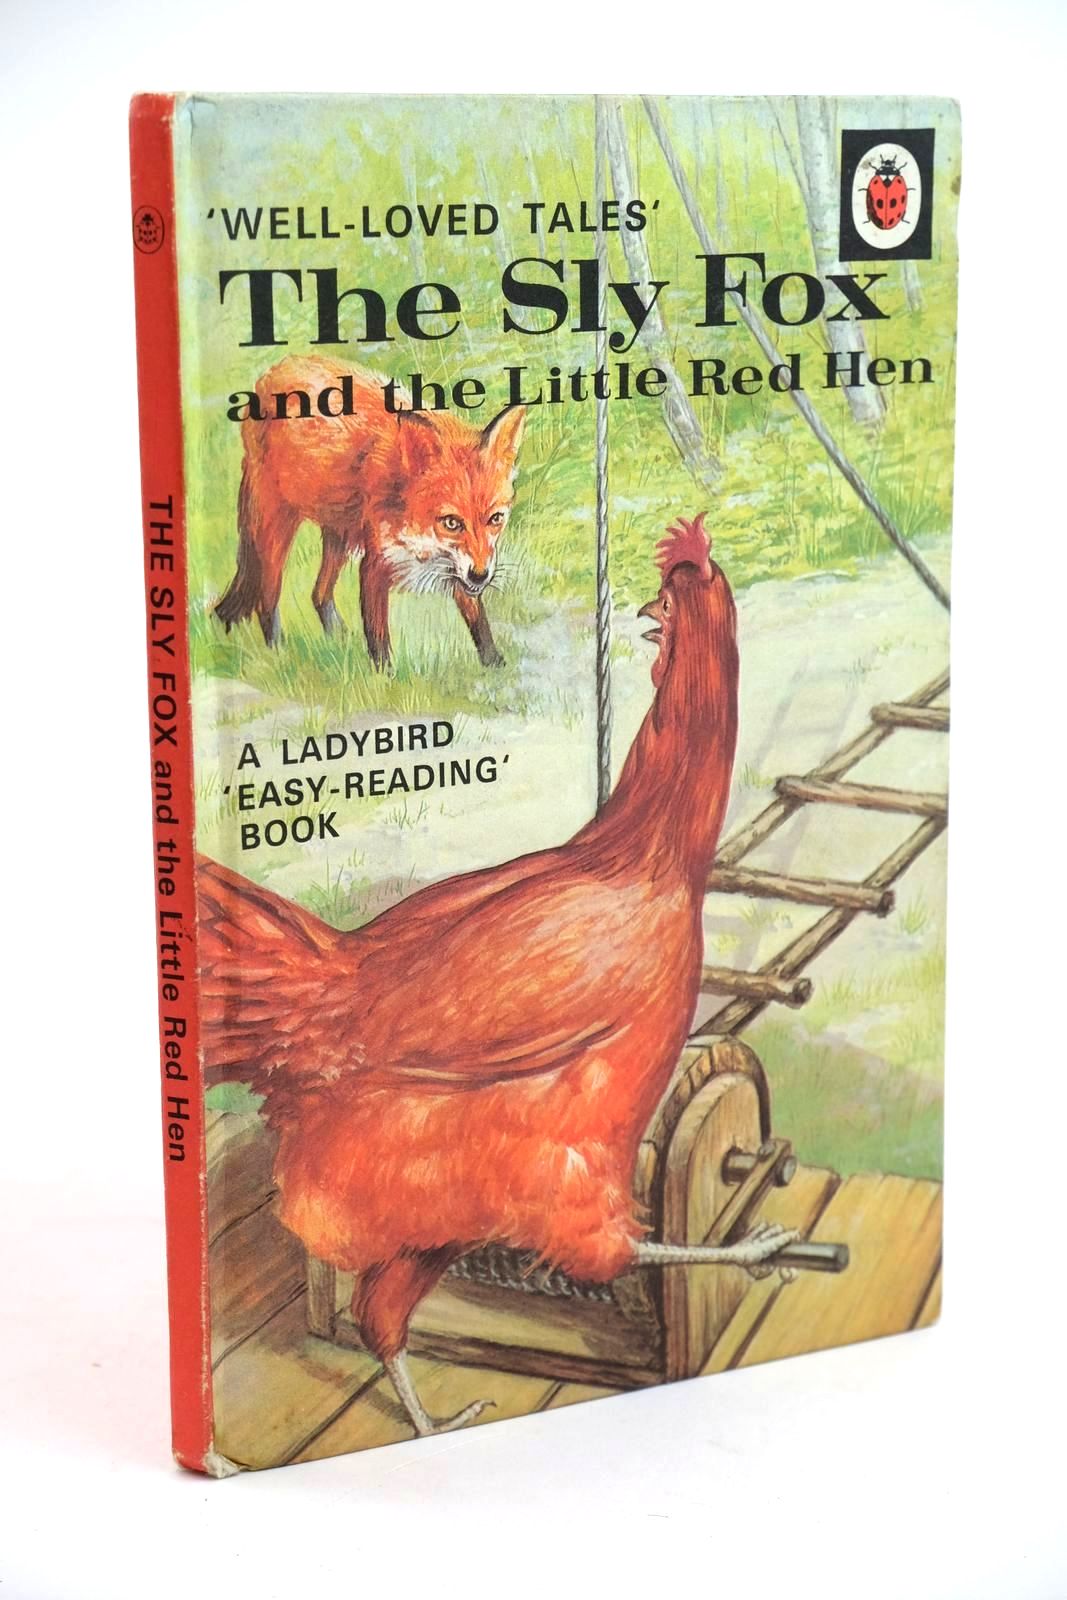 Photo of THE SLY FOX AND THE LITTLE RED HEN written by Southgate, Vera illustrated by Lumley, Robert published by Wills &amp; Hepworth Ltd. (STOCK CODE: 1321466)  for sale by Stella & Rose's Books